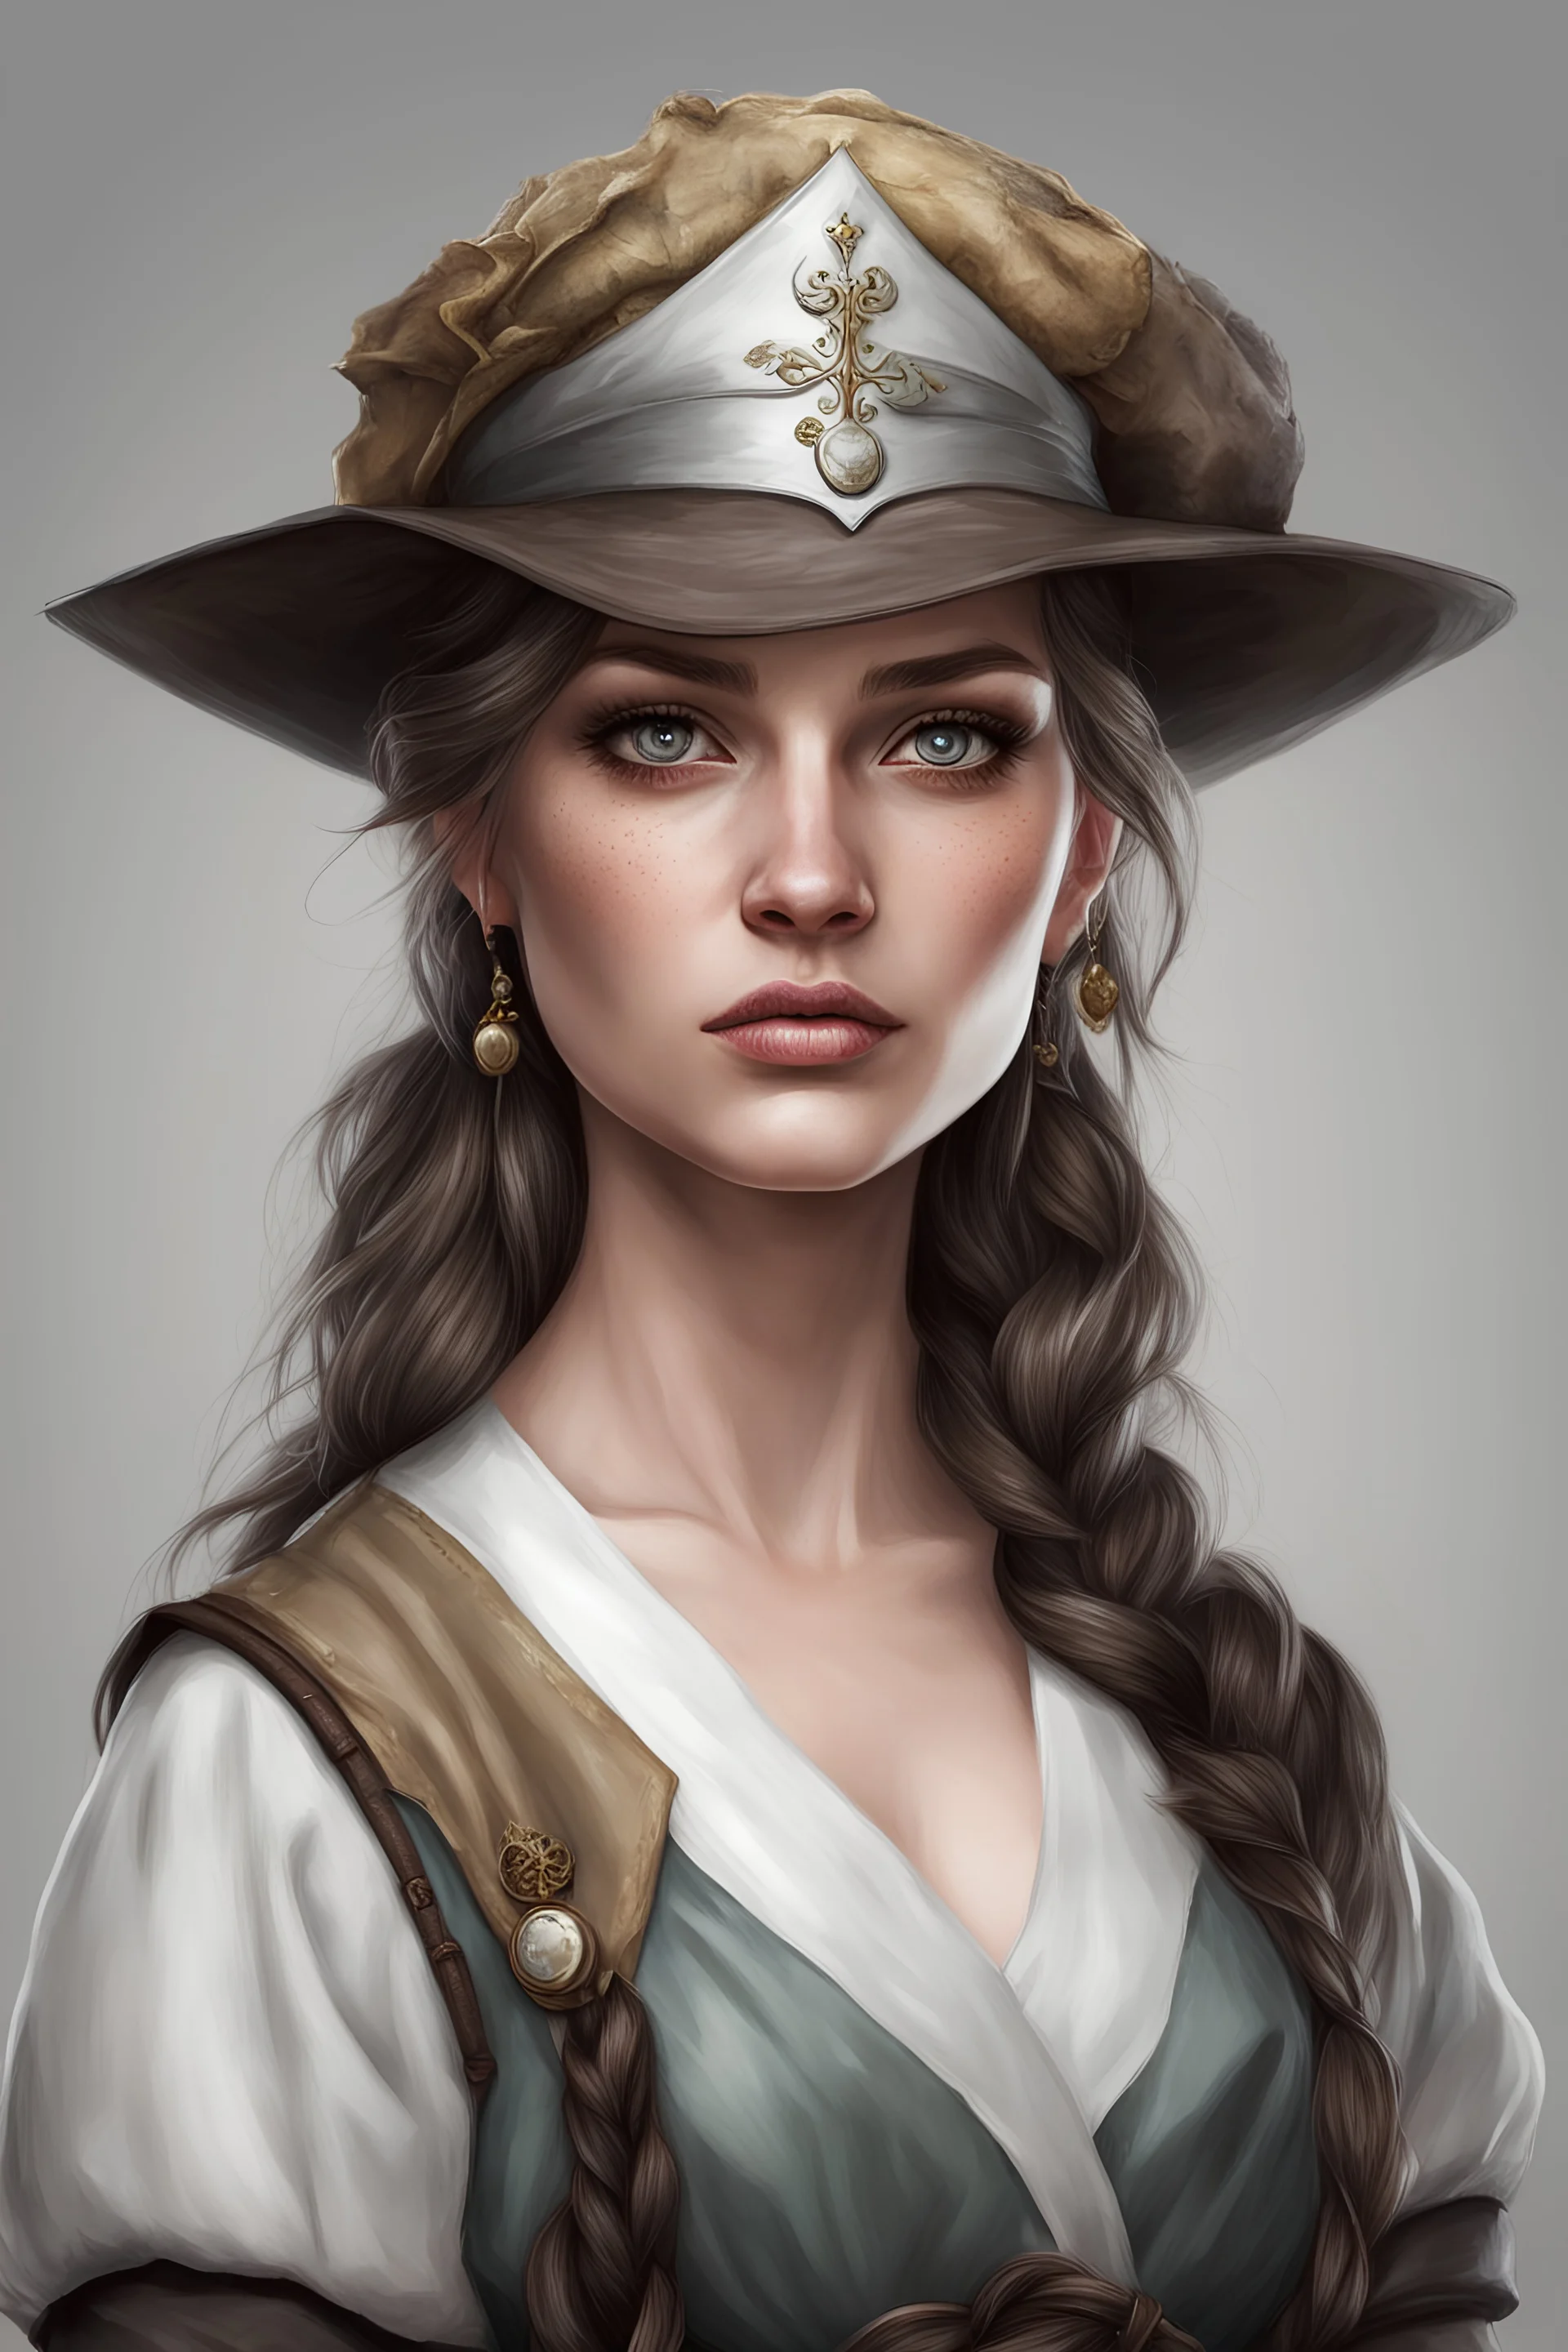 portrait of a woman, realistic style, ugly, concept art, true anatomy, clothing accessories, fantasy medieval, nurse, emotion, hat,